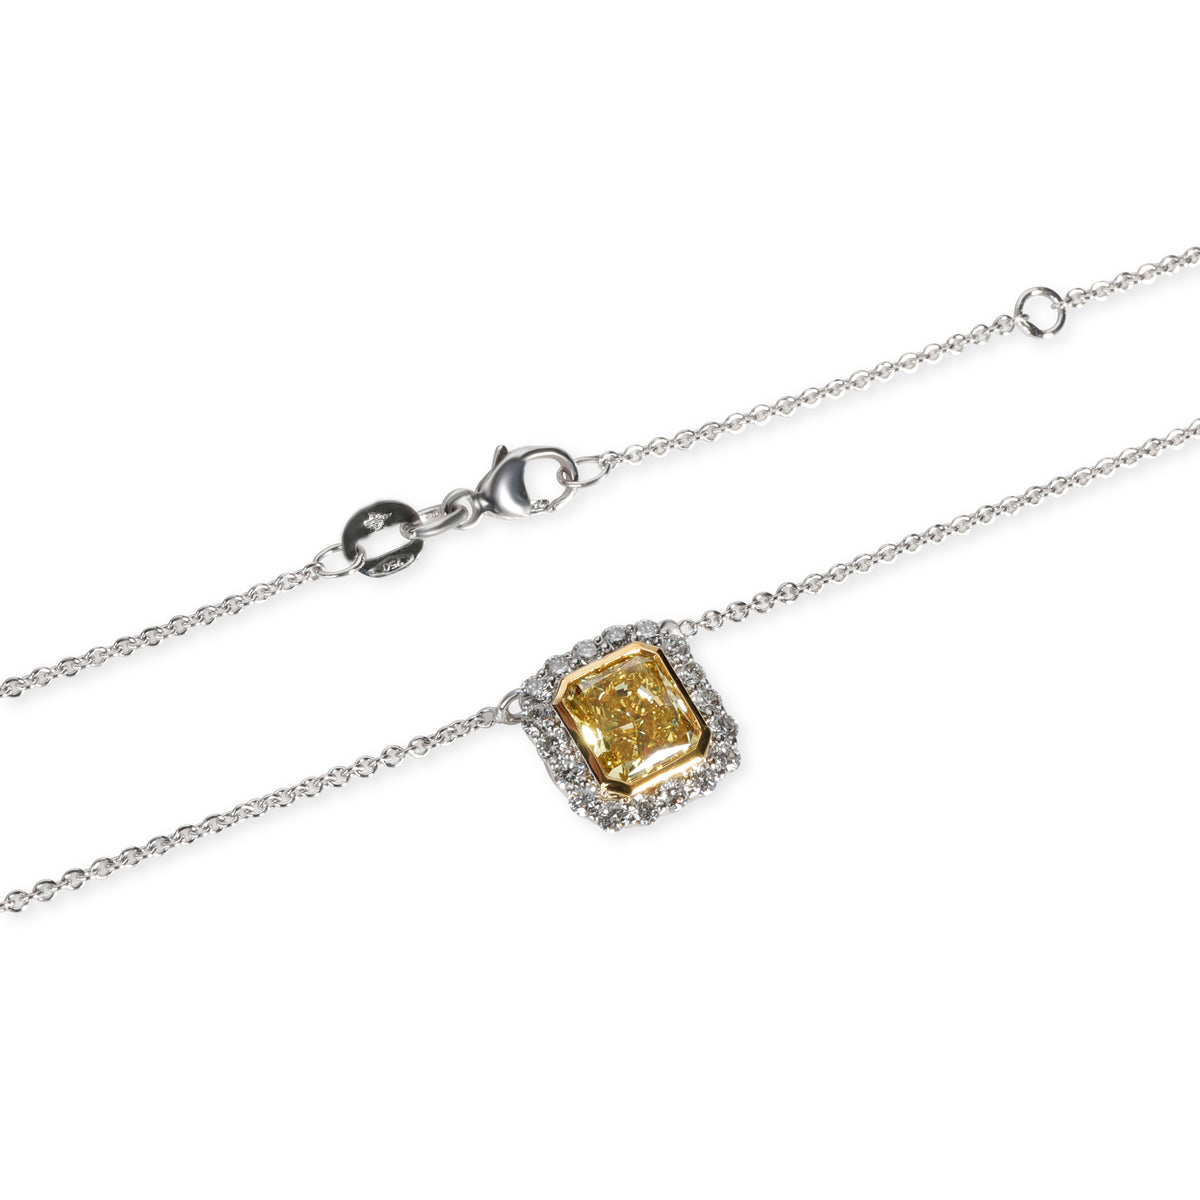 GIA Certified Fancy Vivid Yellow Diamond Necklace in 18K White Gold VS2 1.72 CTW